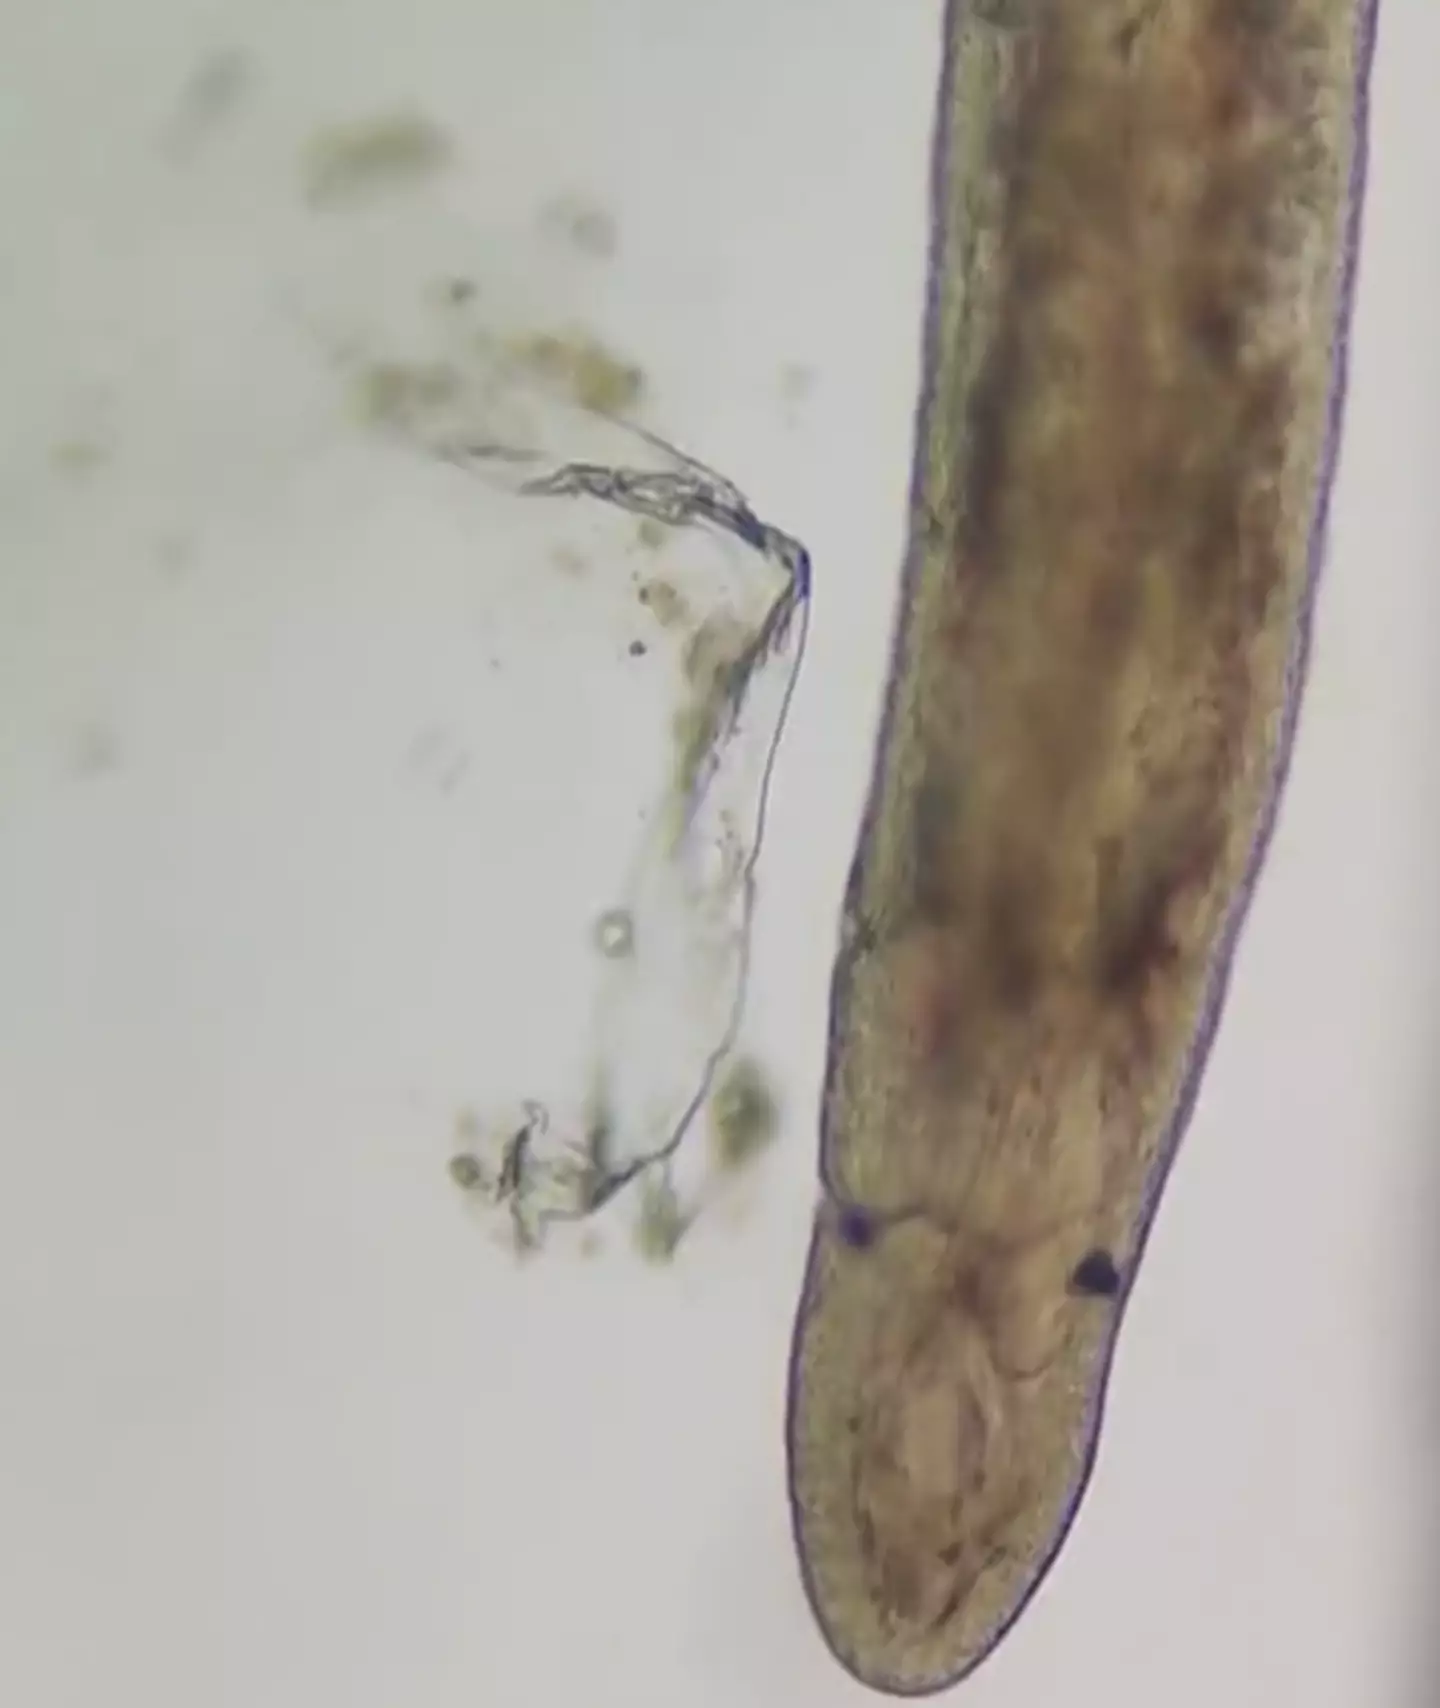 Say hello to this little fella in your water. (TikTok/ microscope.vision)